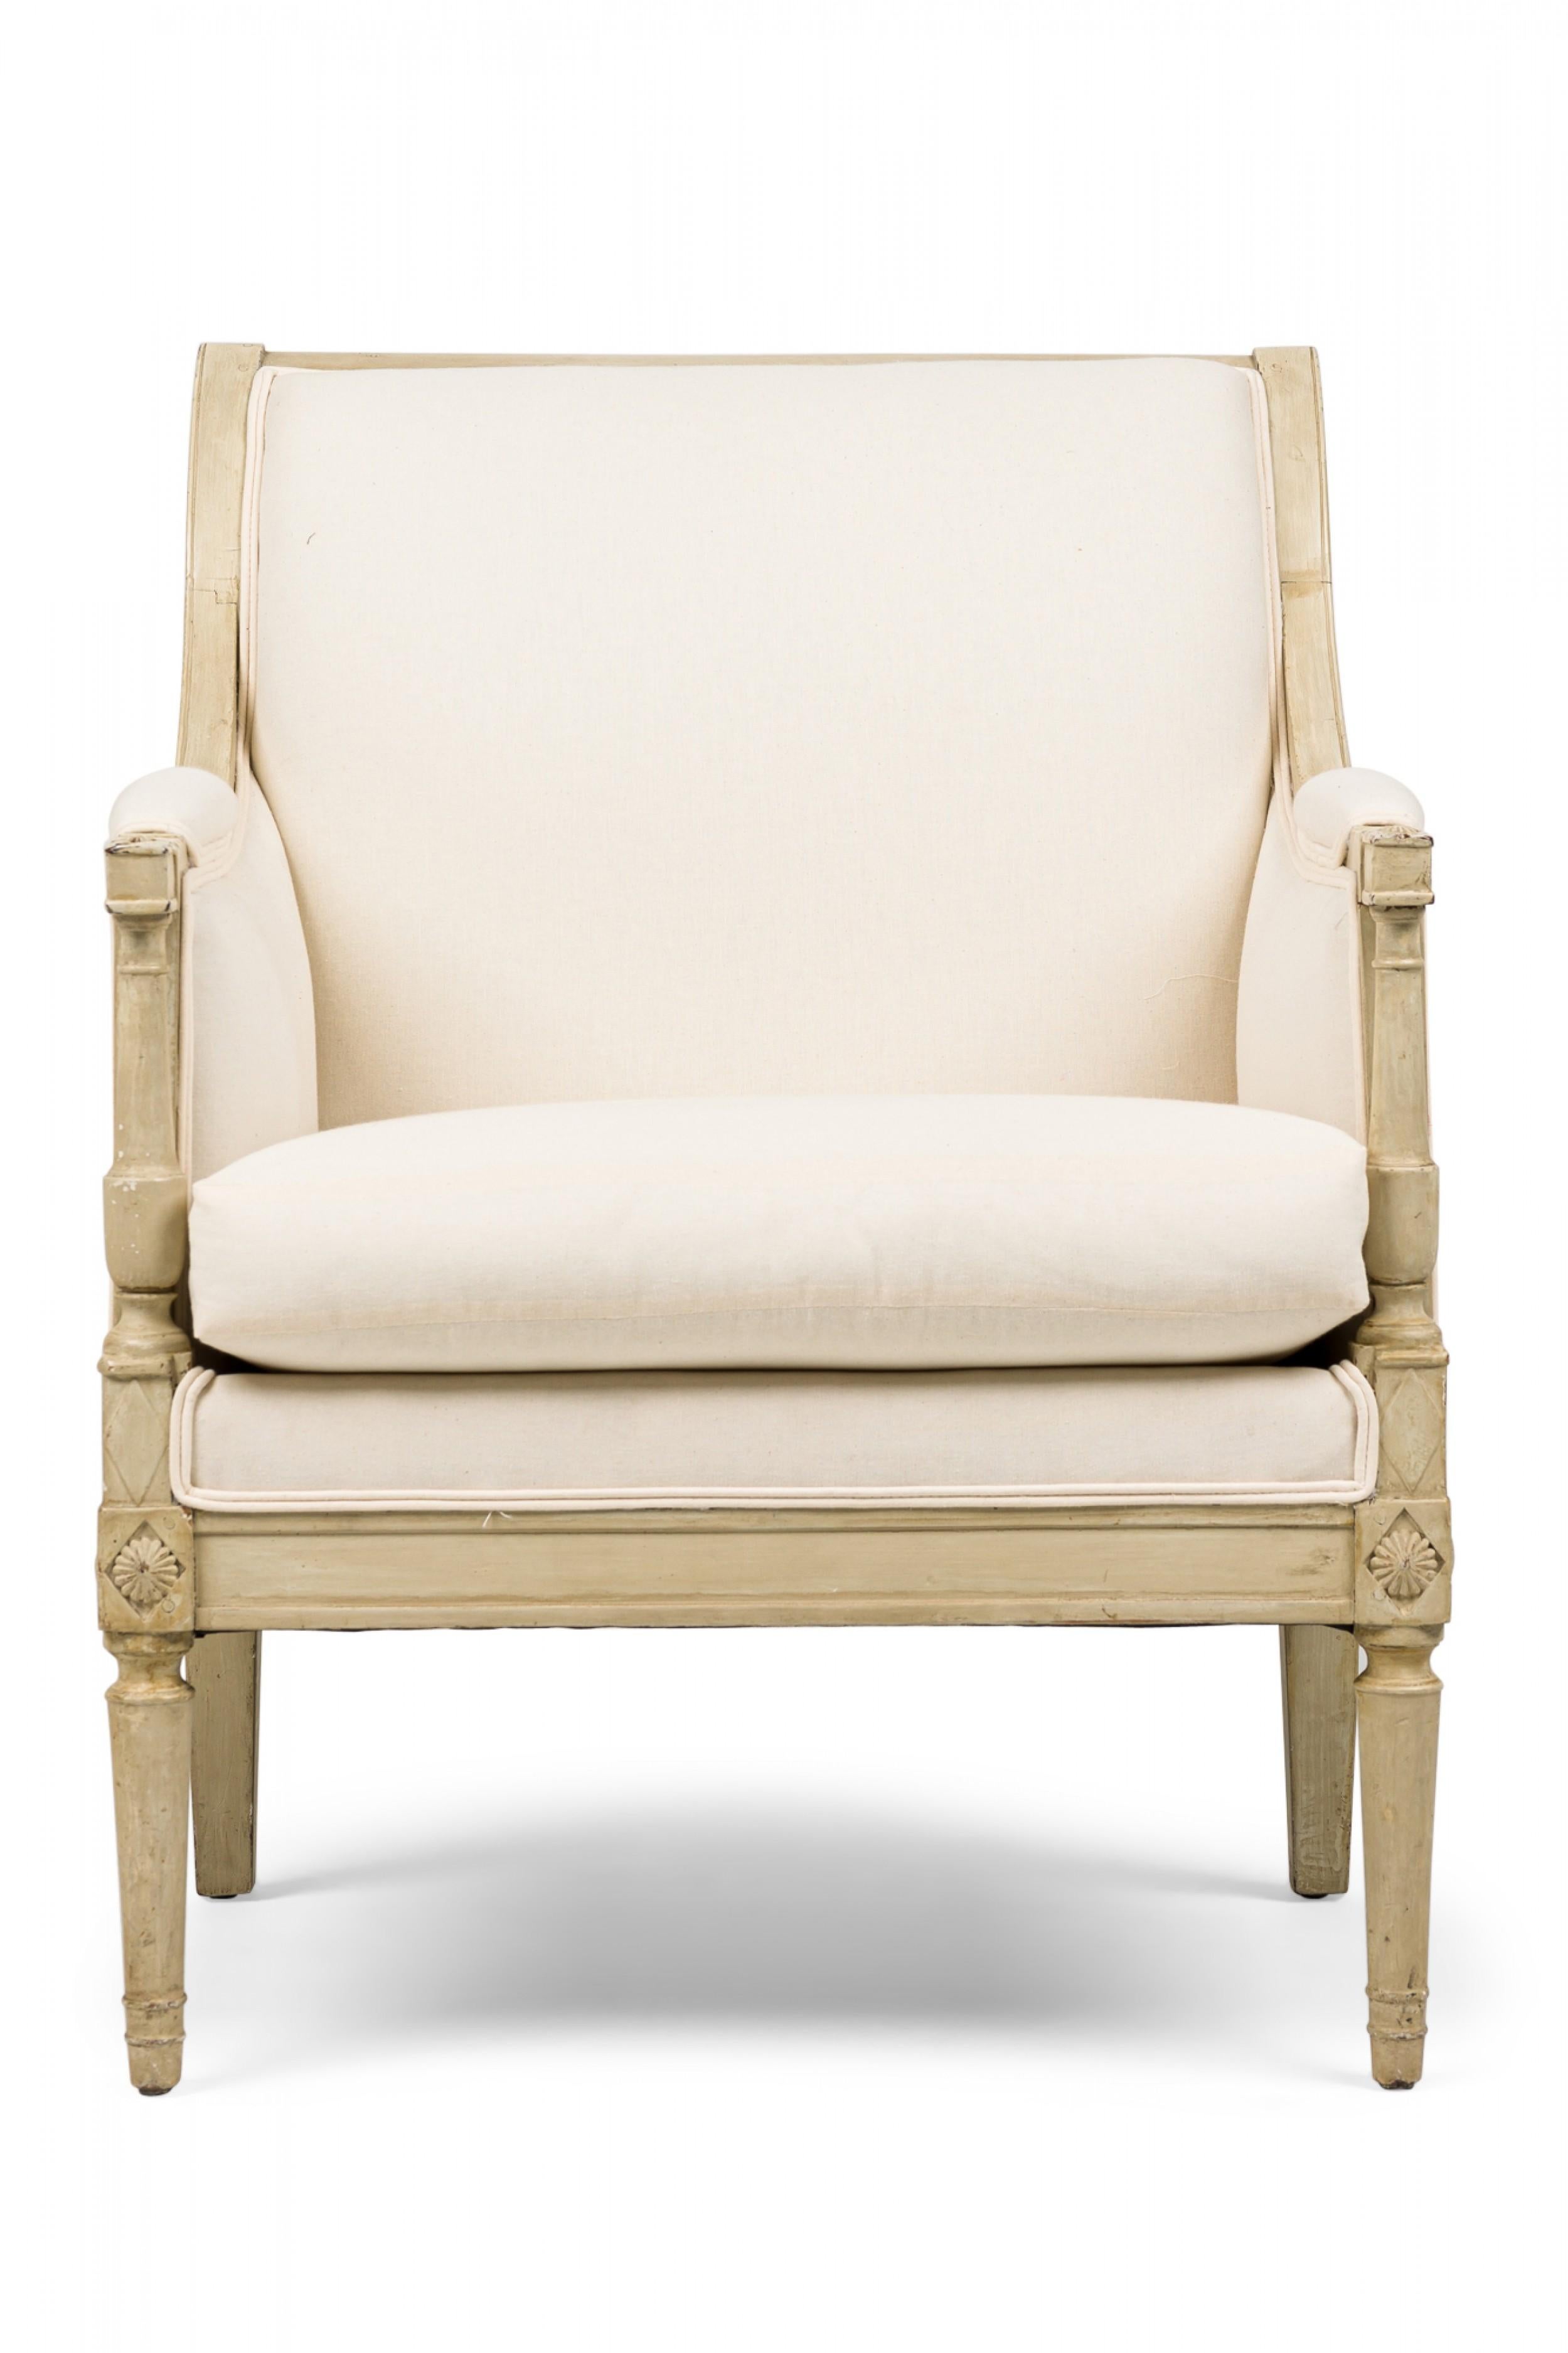 19th Century Pair of Gustavian Swedish Beige Upholstered Bergere Armchairs For Sale